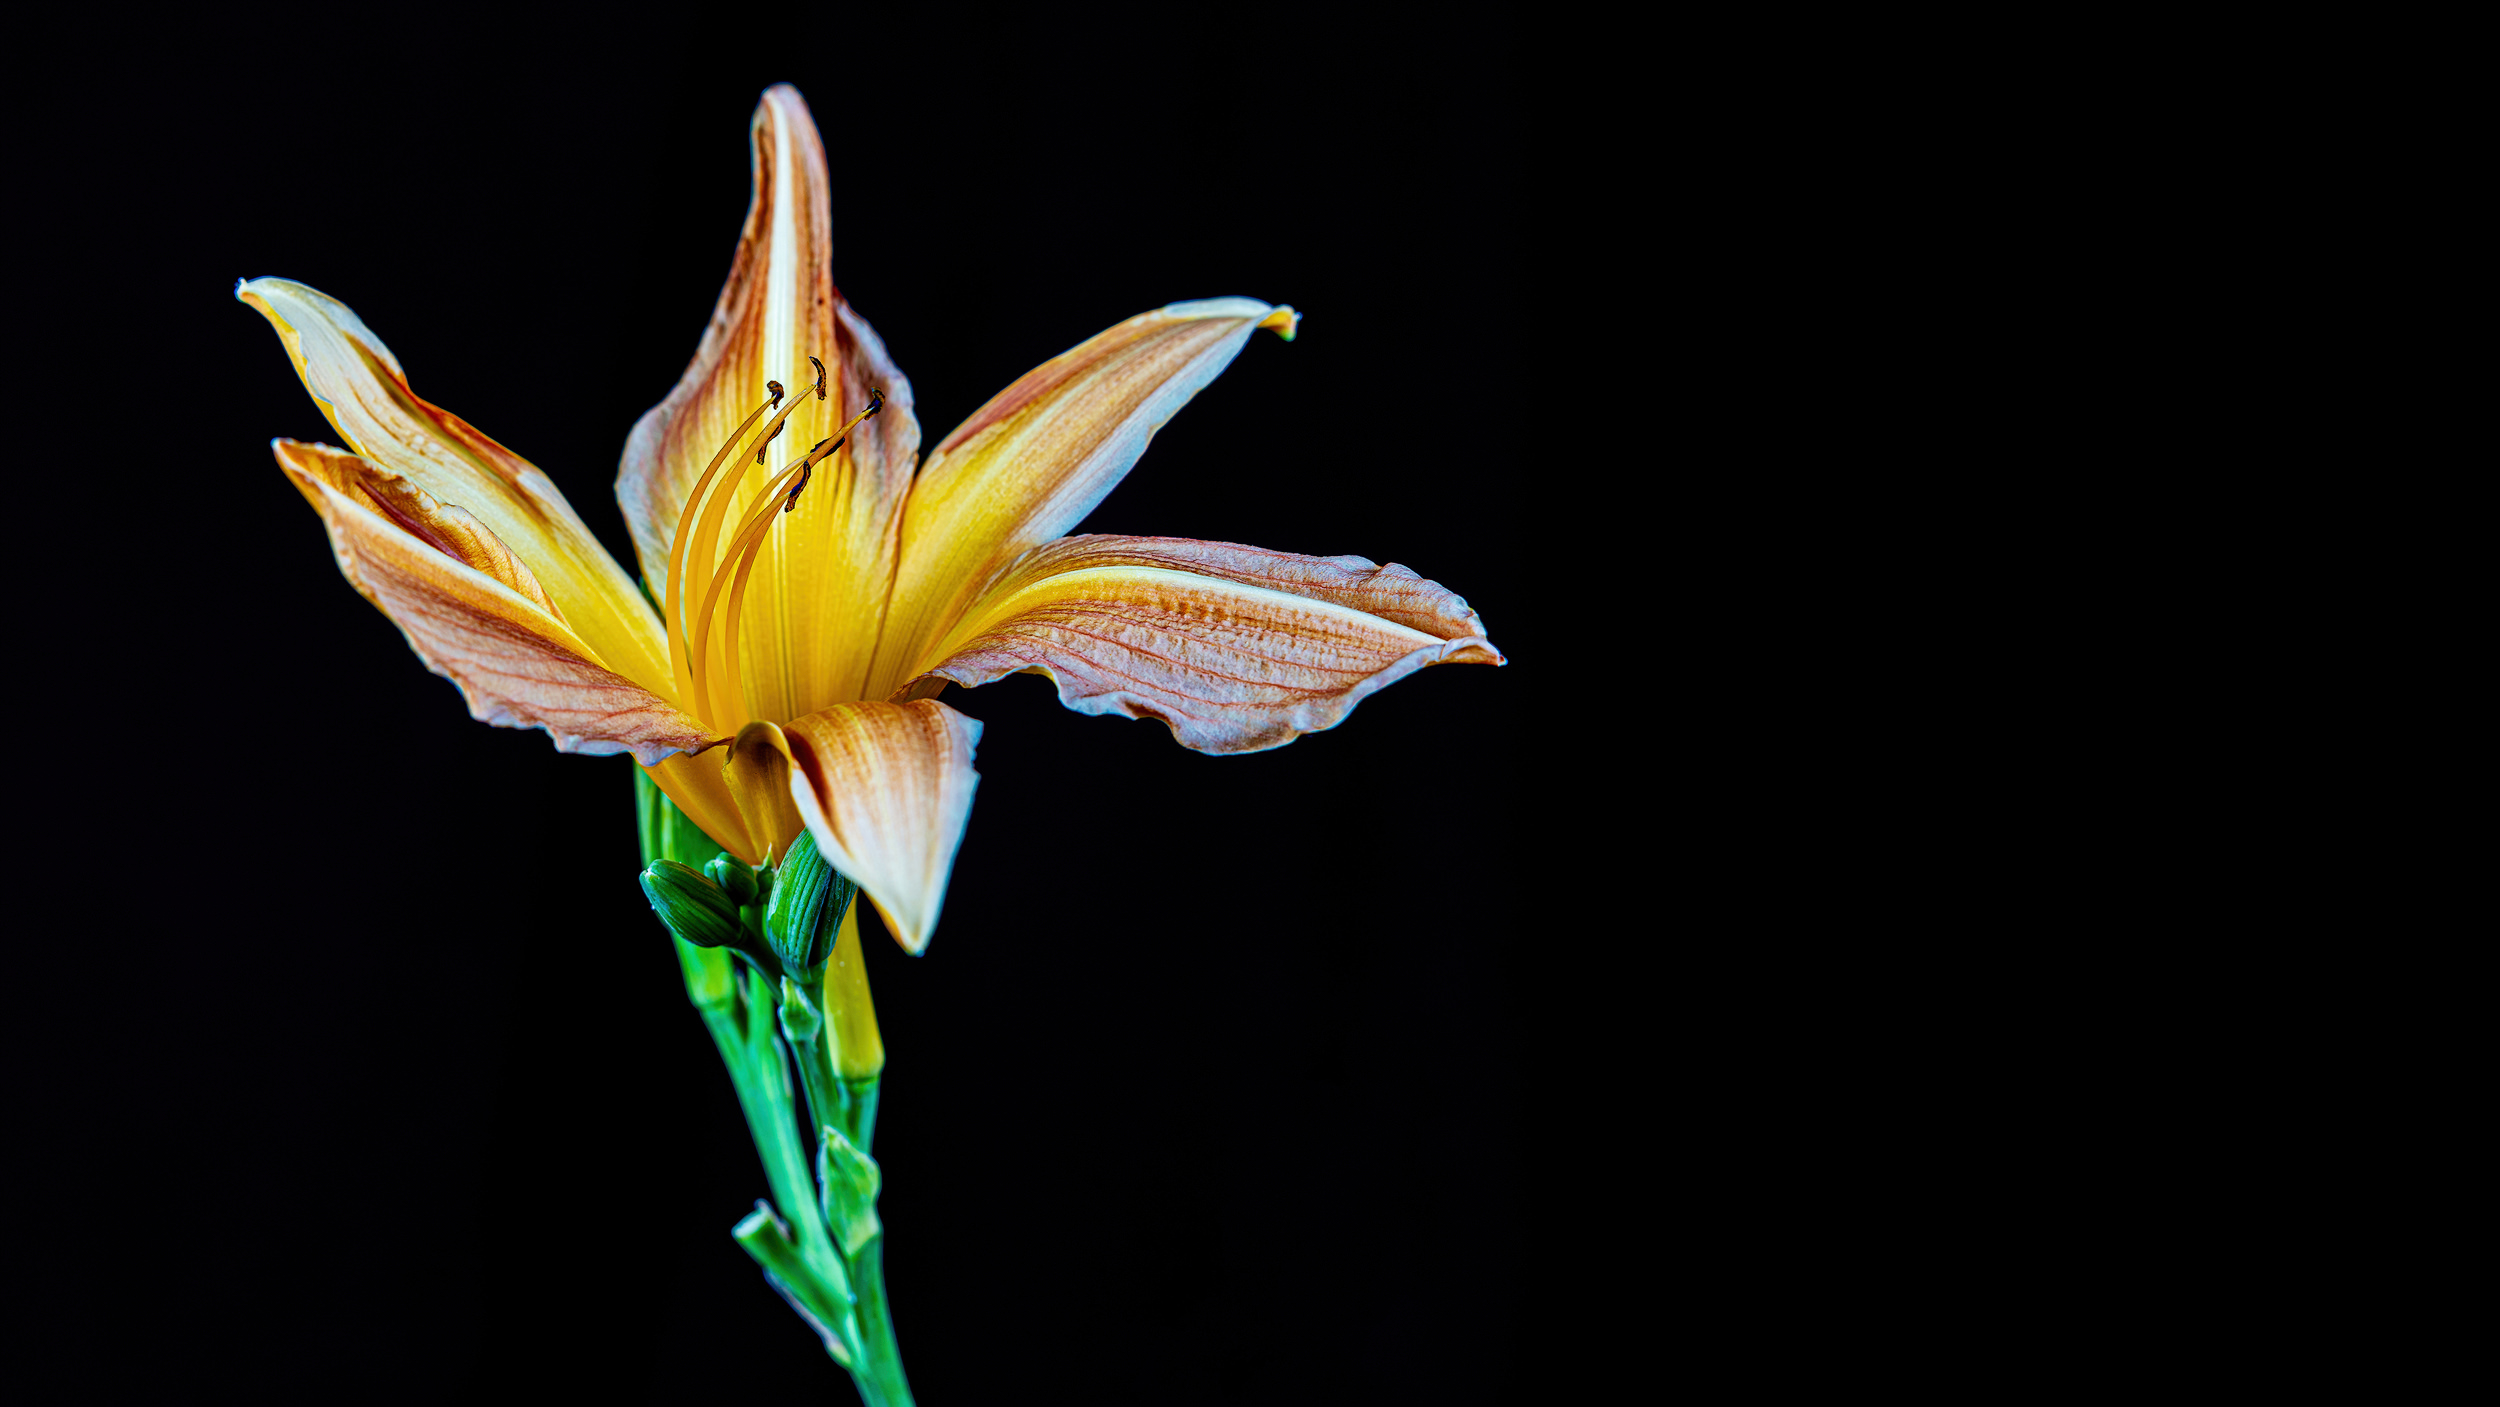 Asiatic Hybrid Lilly